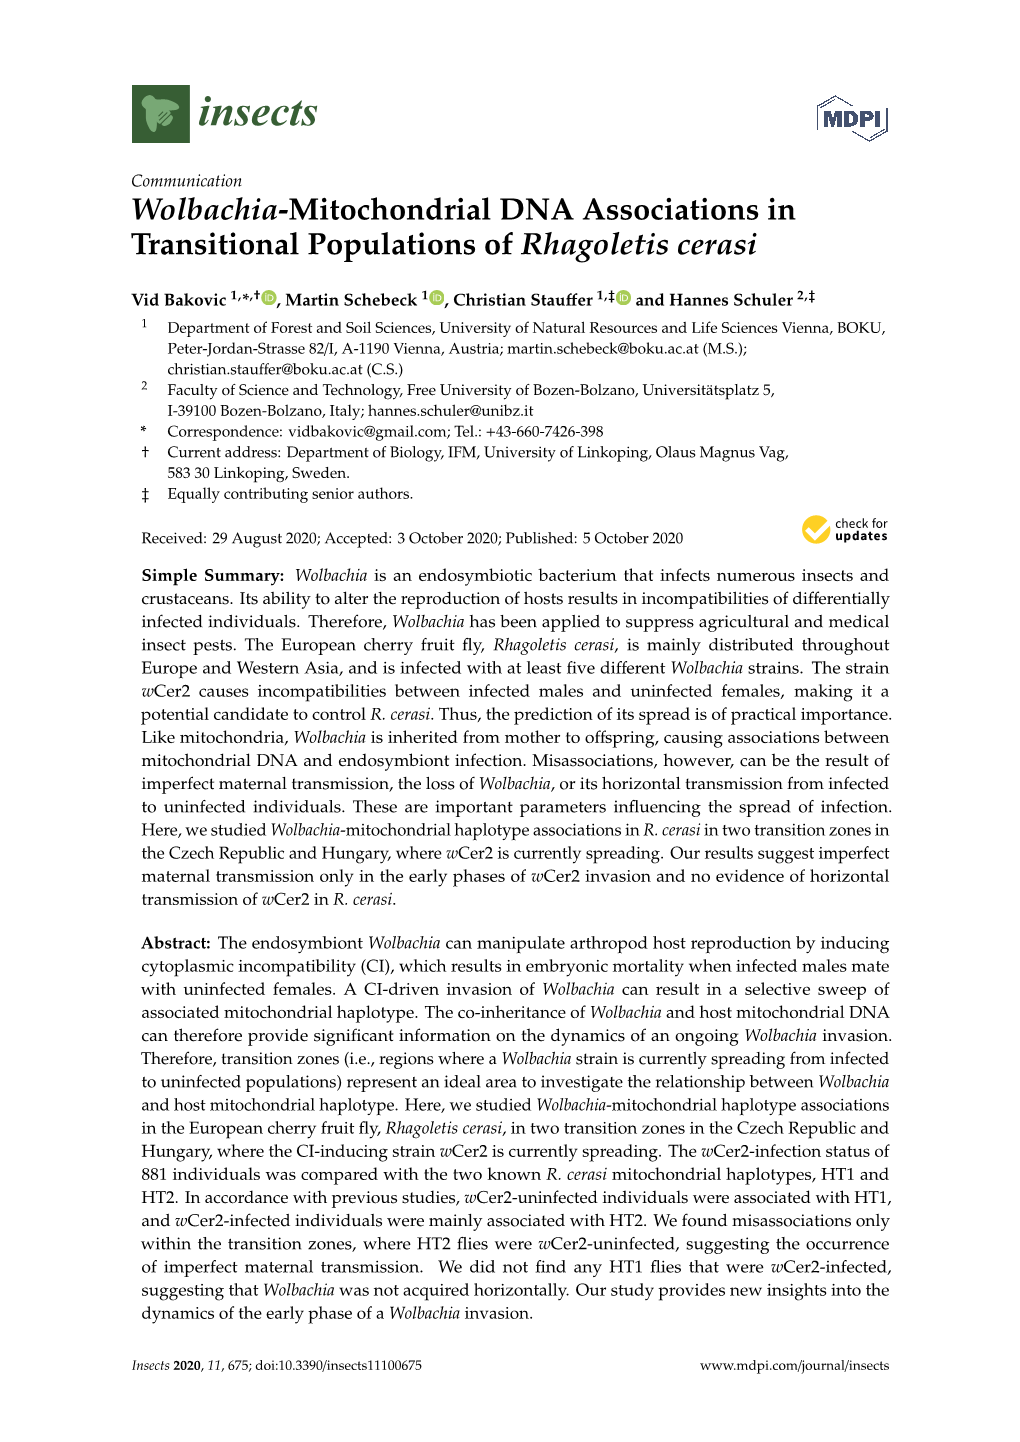 Wolbachia-Mitochondrial DNA Associations in Transitional Populations of Rhagoletis Cerasi